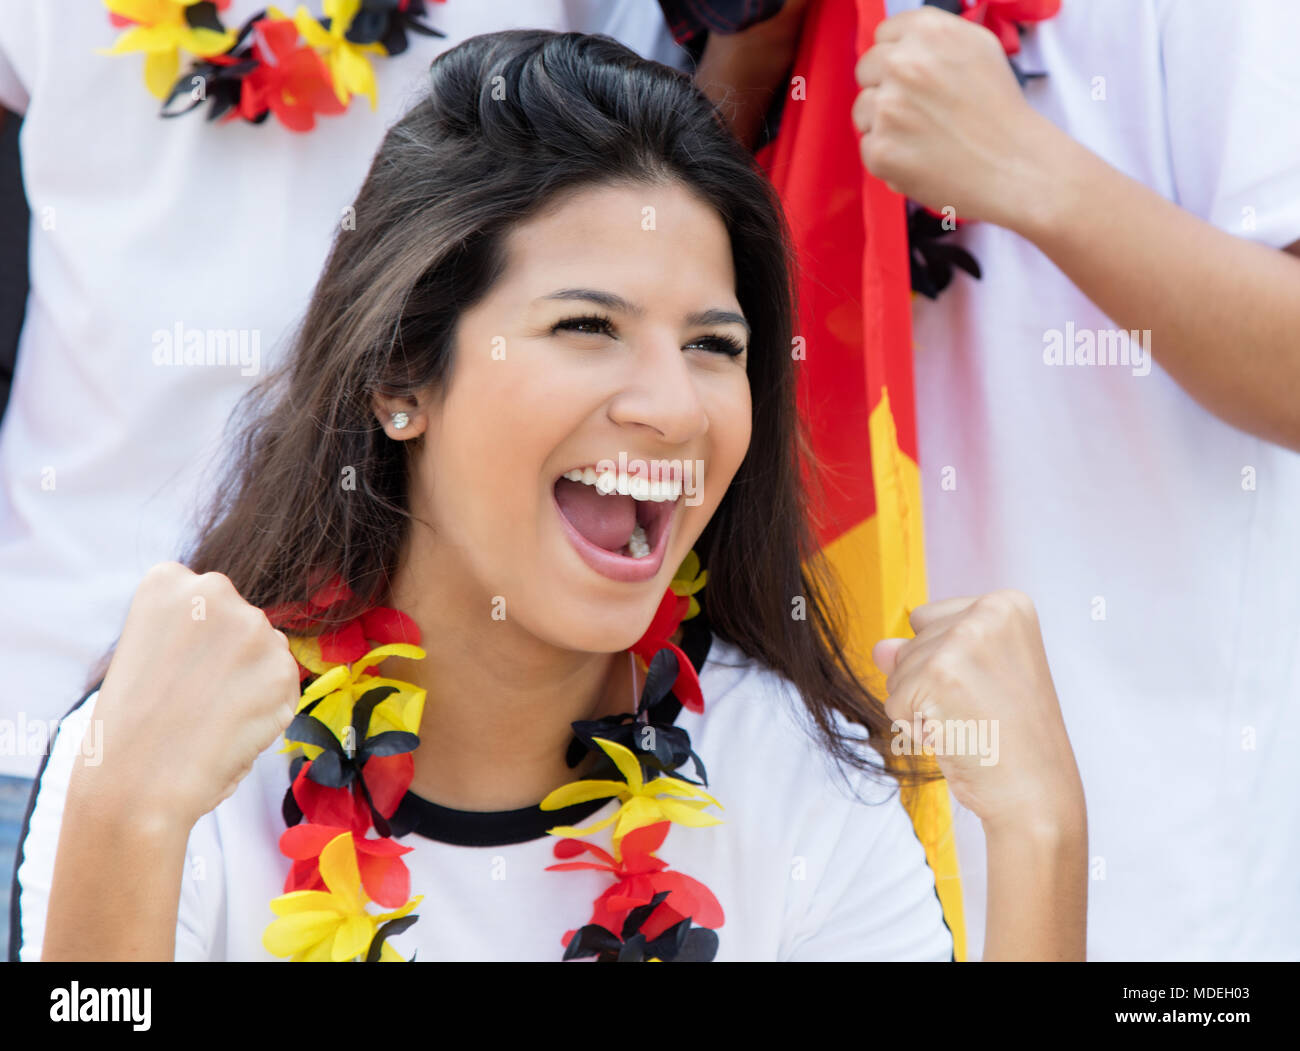 Happy german soccer fan at stadium with other fans and german flag Stock Photo